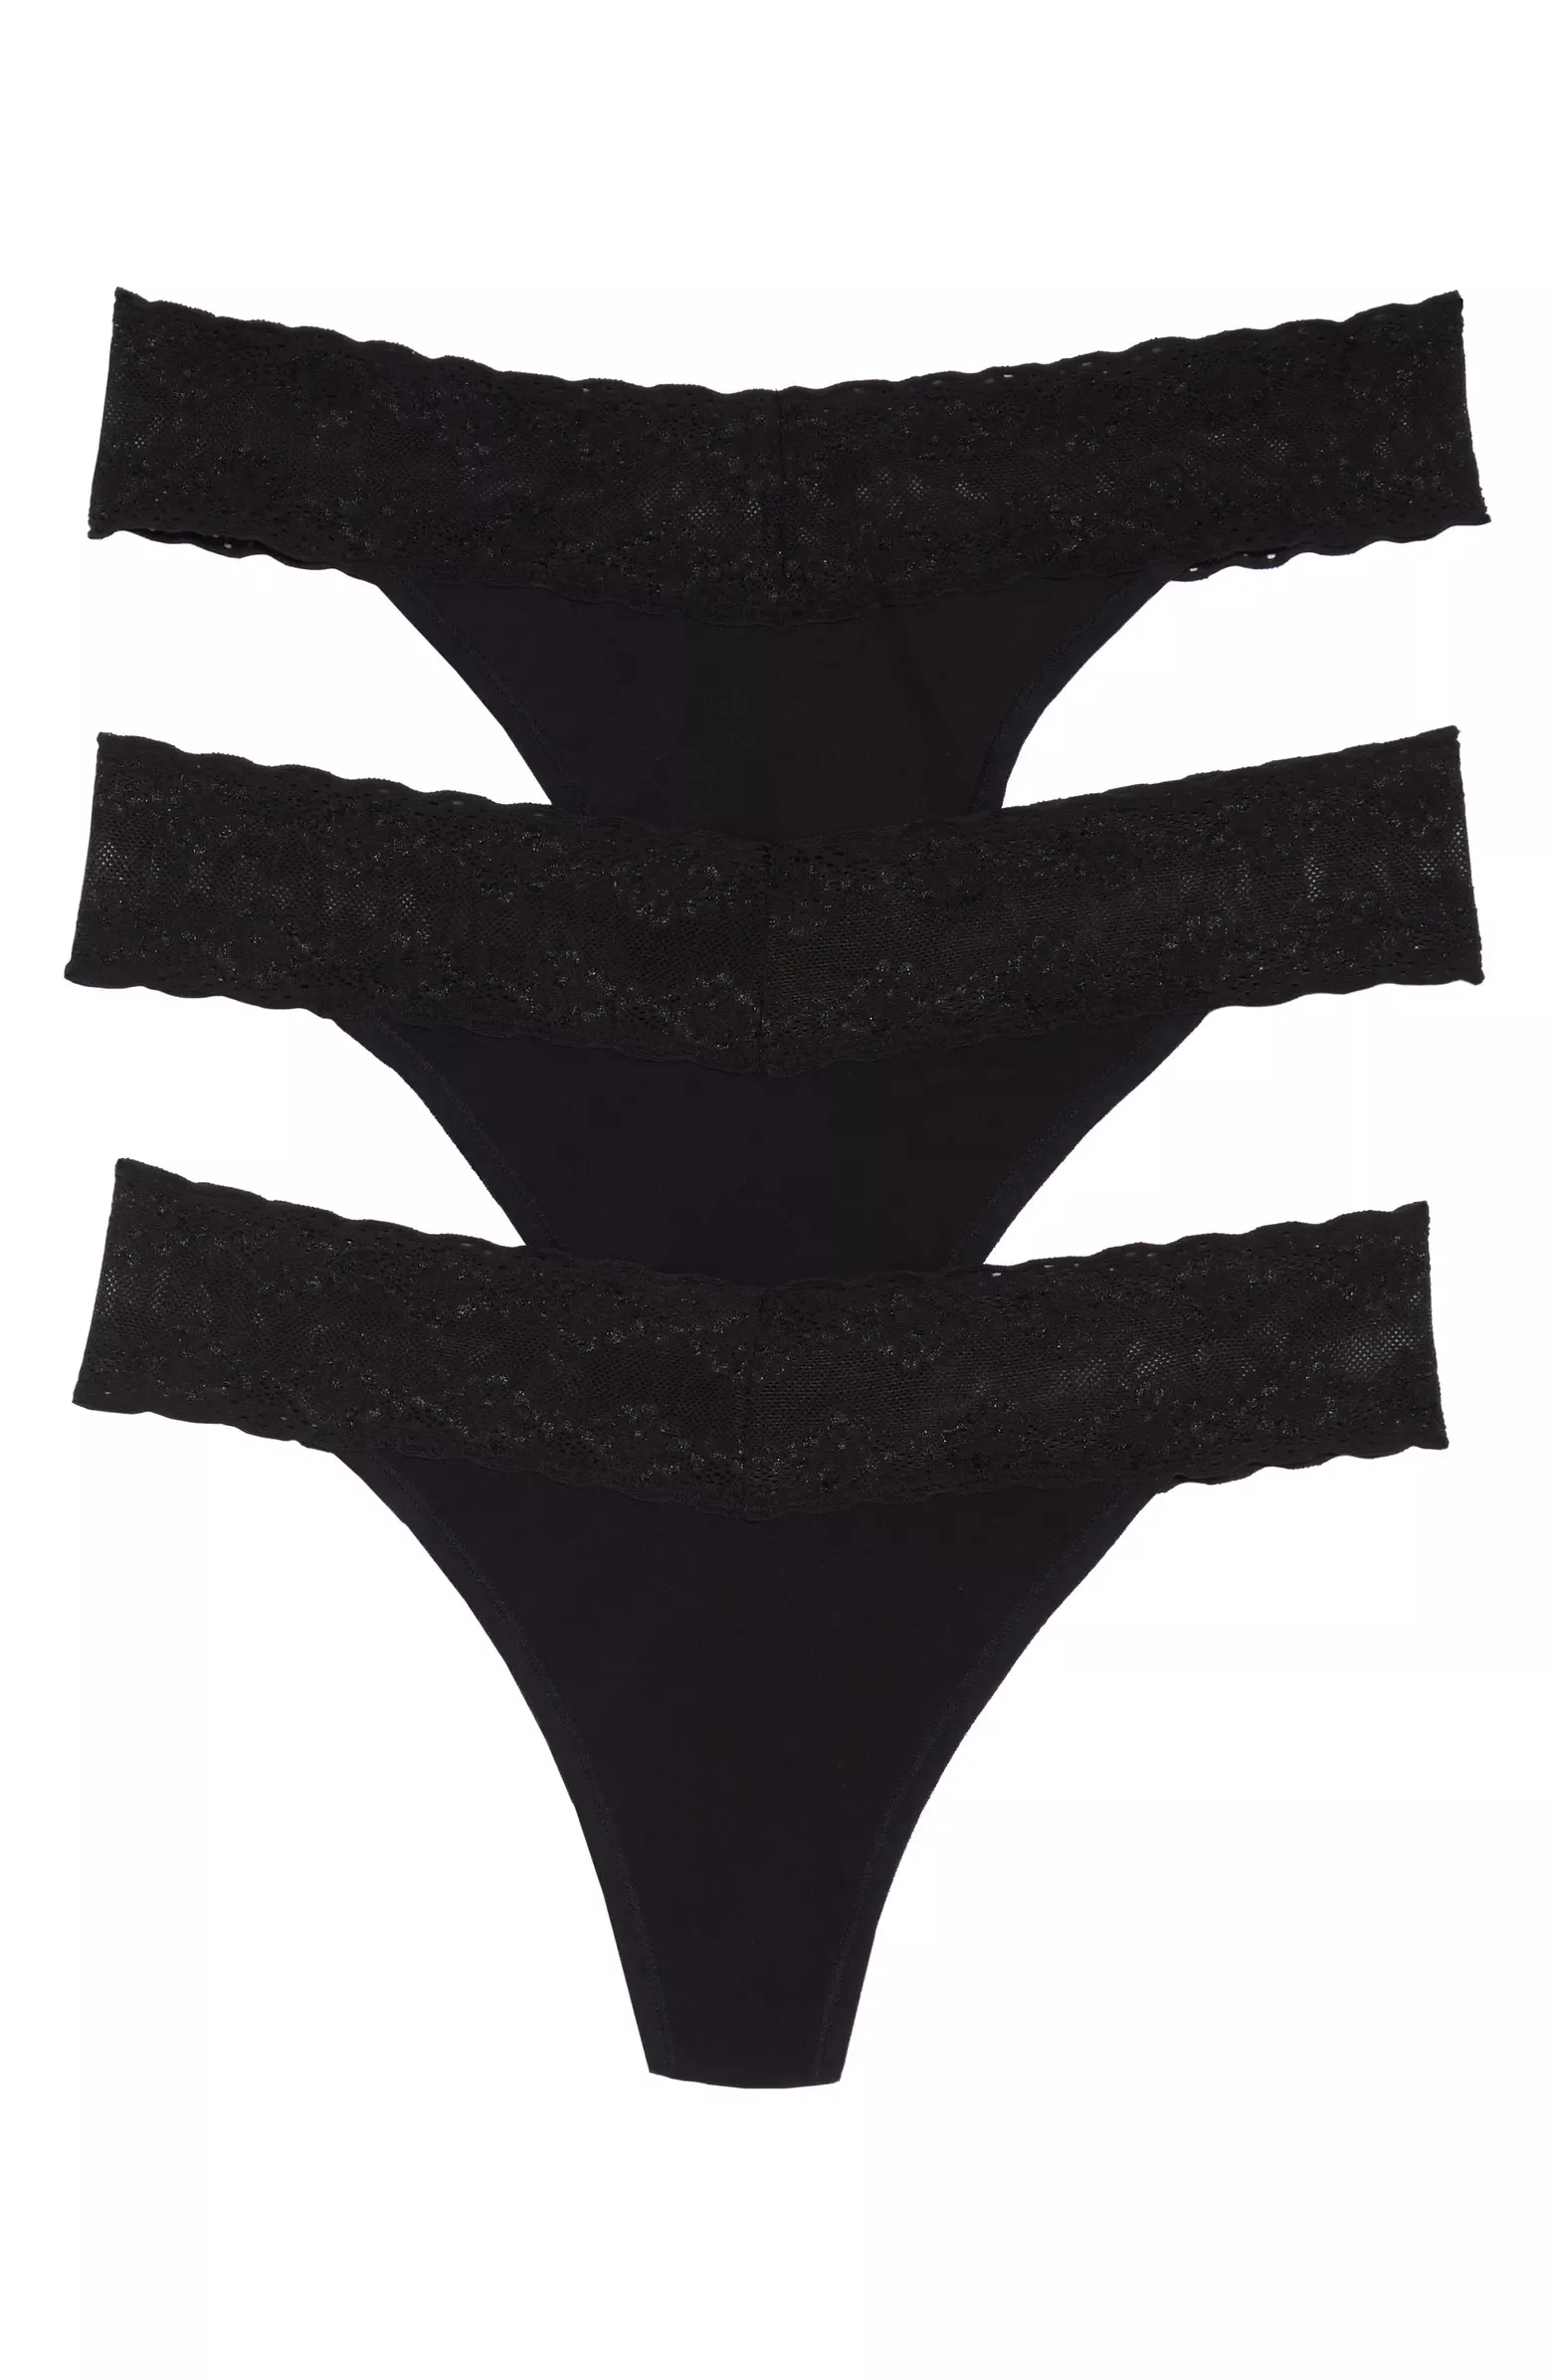 Undie-tectable® Thong curated on LTK